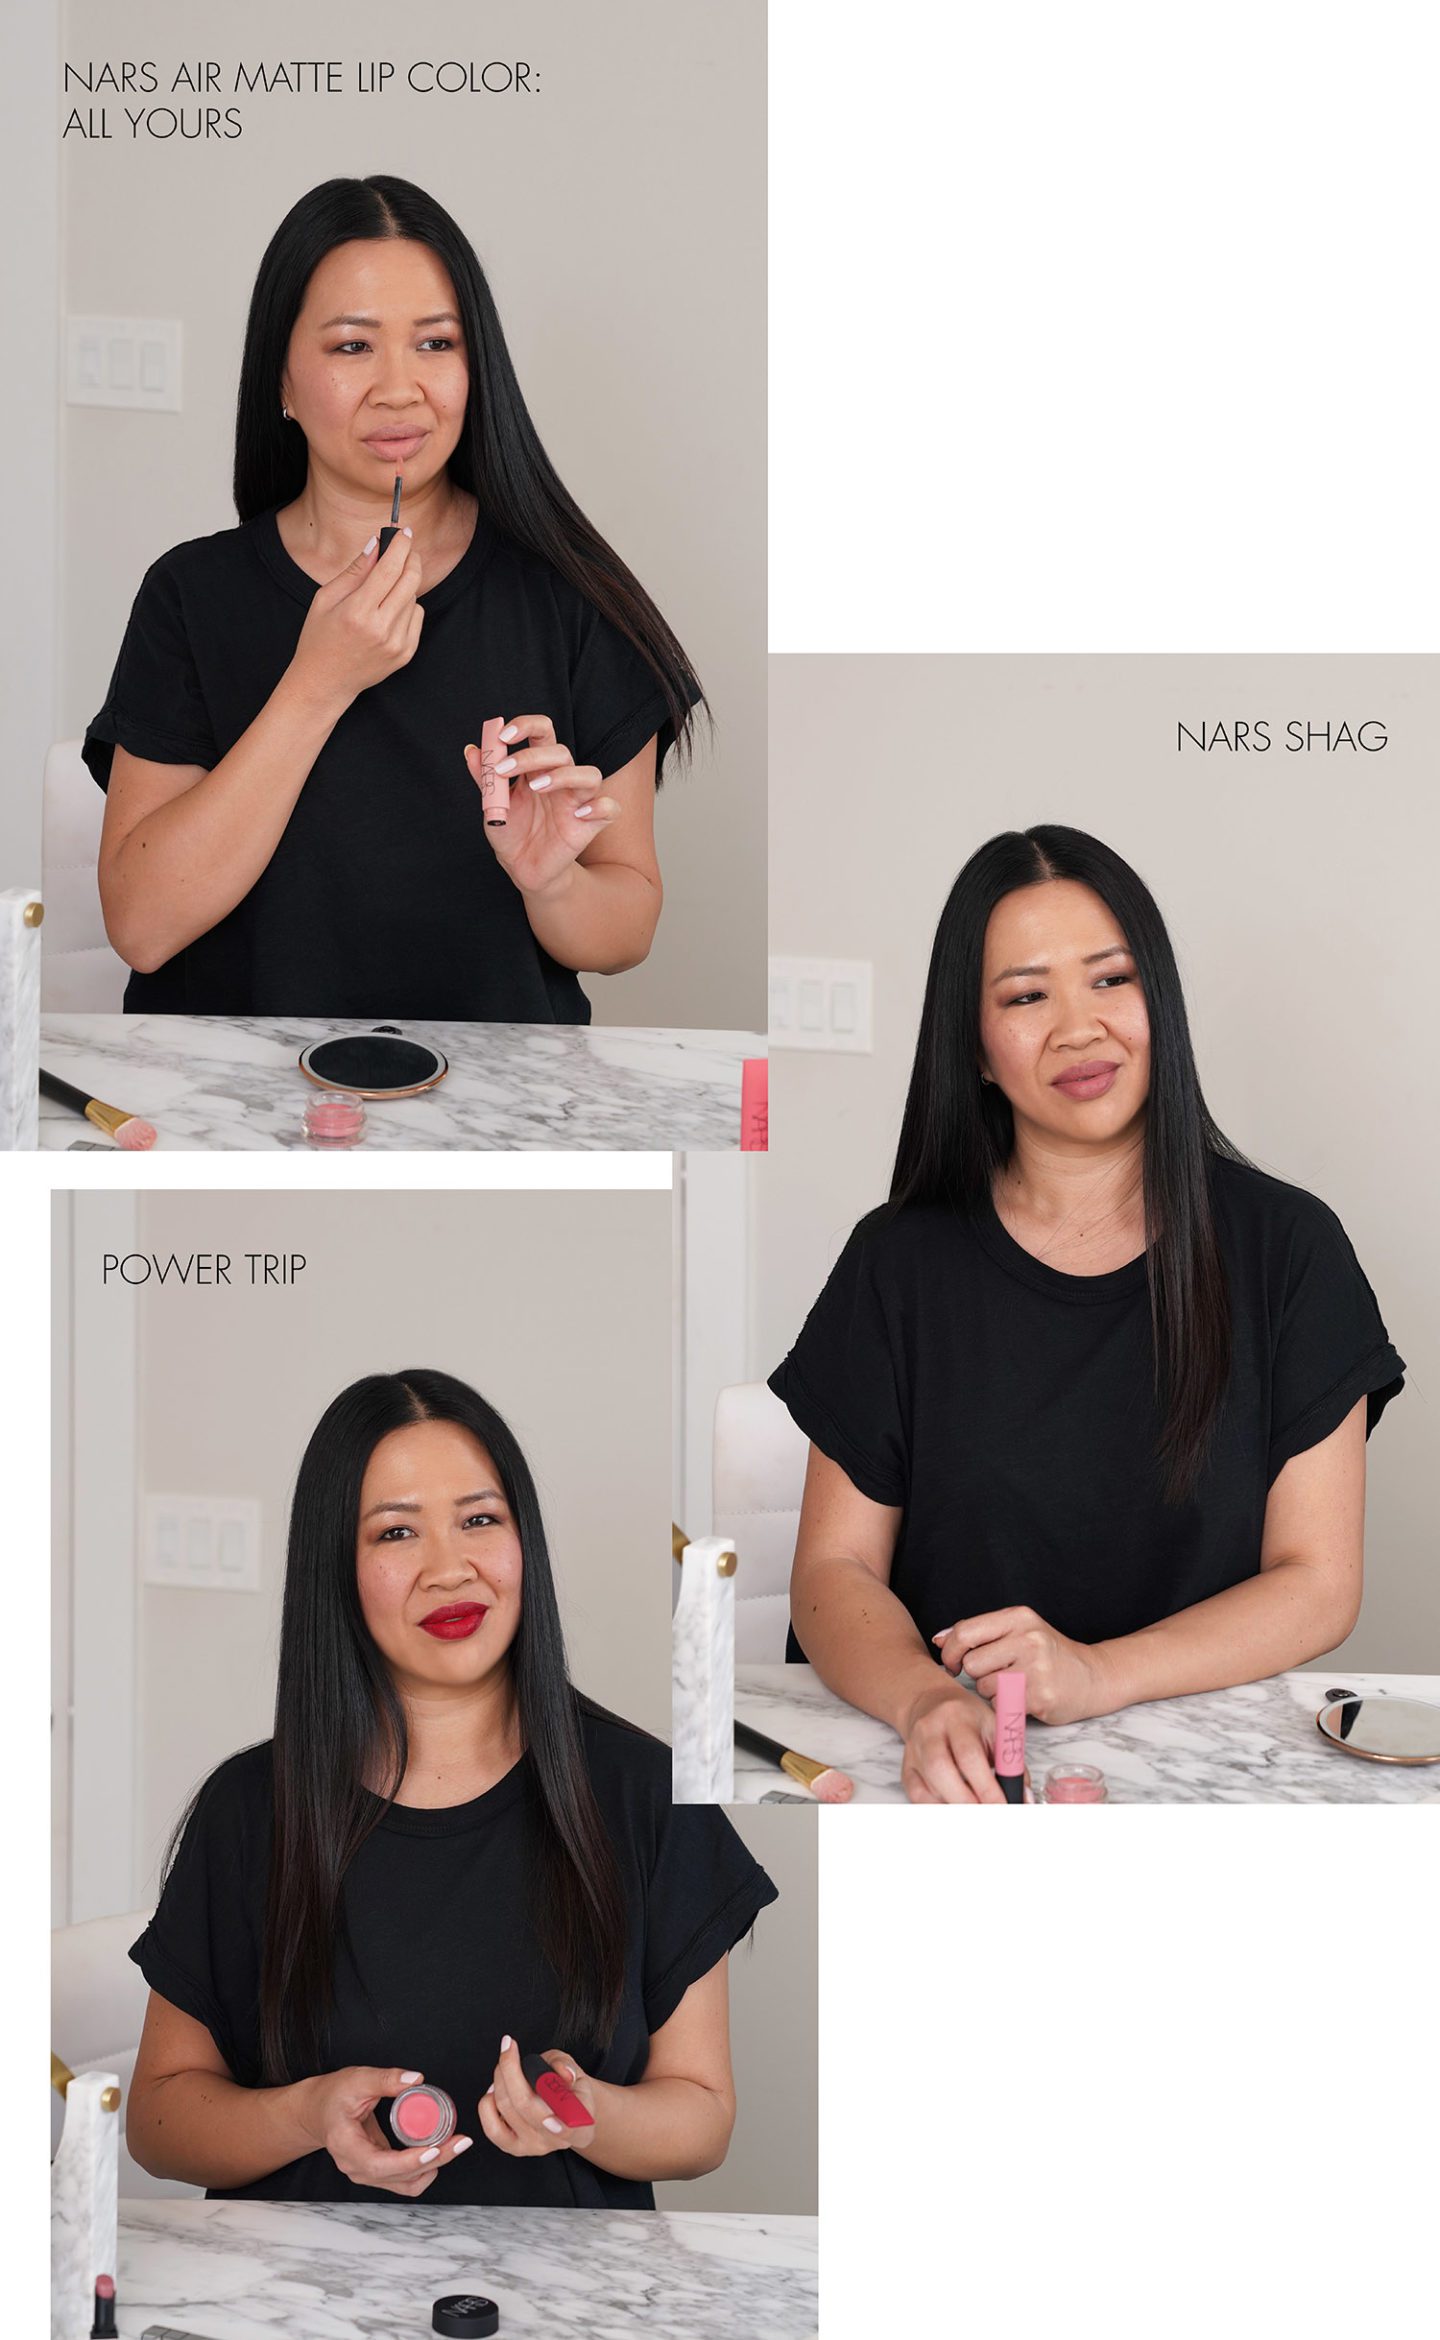 NARS Air Matte Lip Color All Yours, Shag and Power Trip